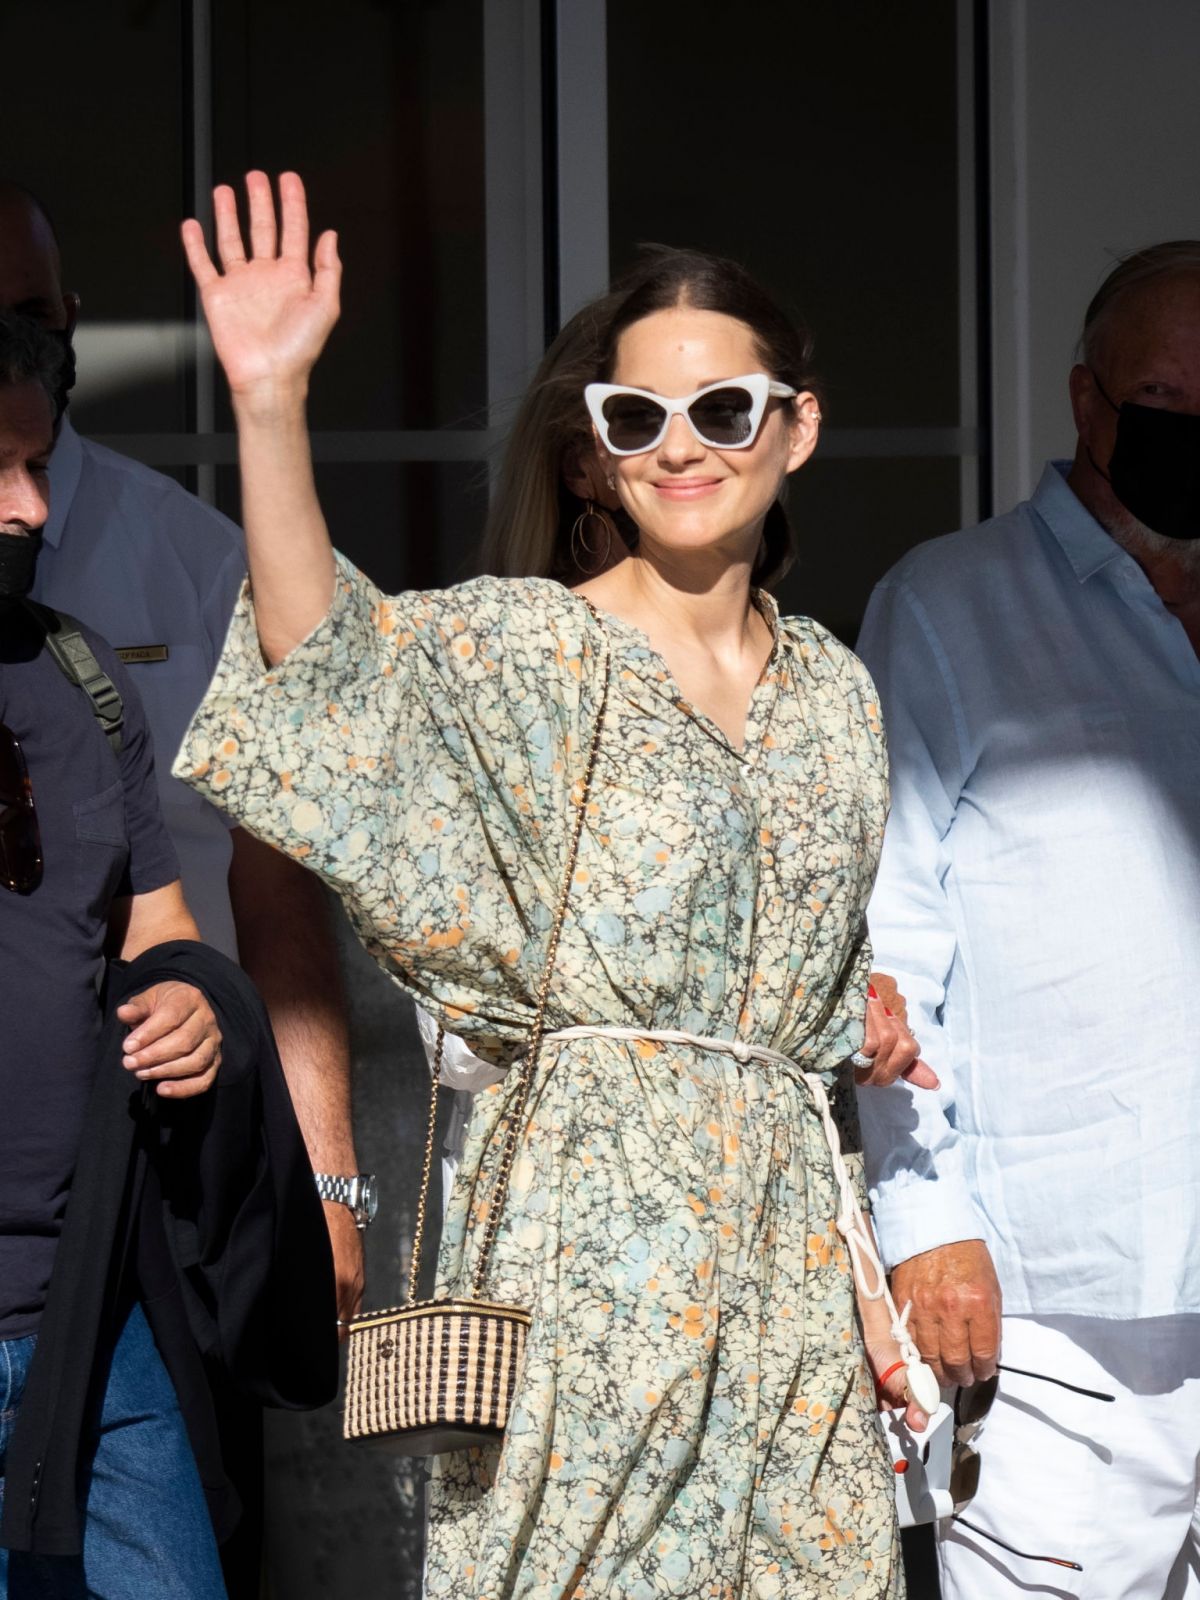 MARION COTILLARD at Martinez Hotel at Festival in Cannes 07/08/2021 ...